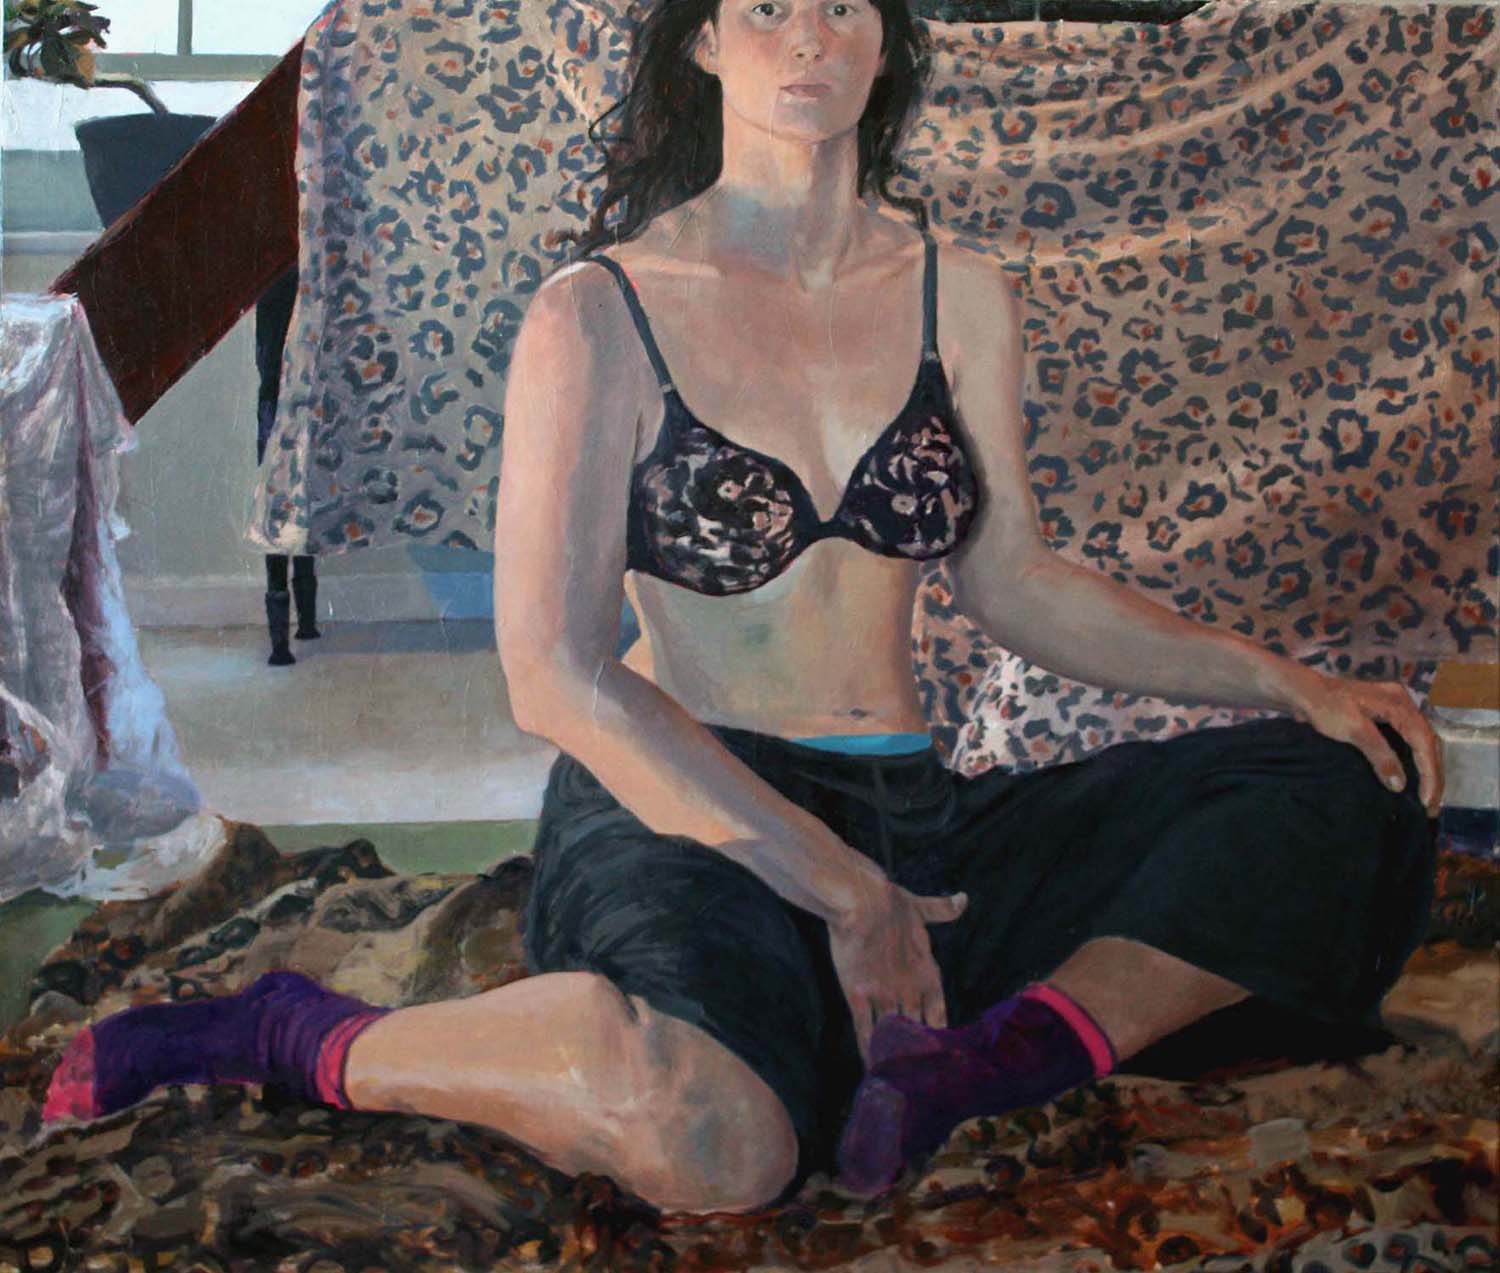   Camouflage , 2012. Oil on canvas, 48 x 60" 